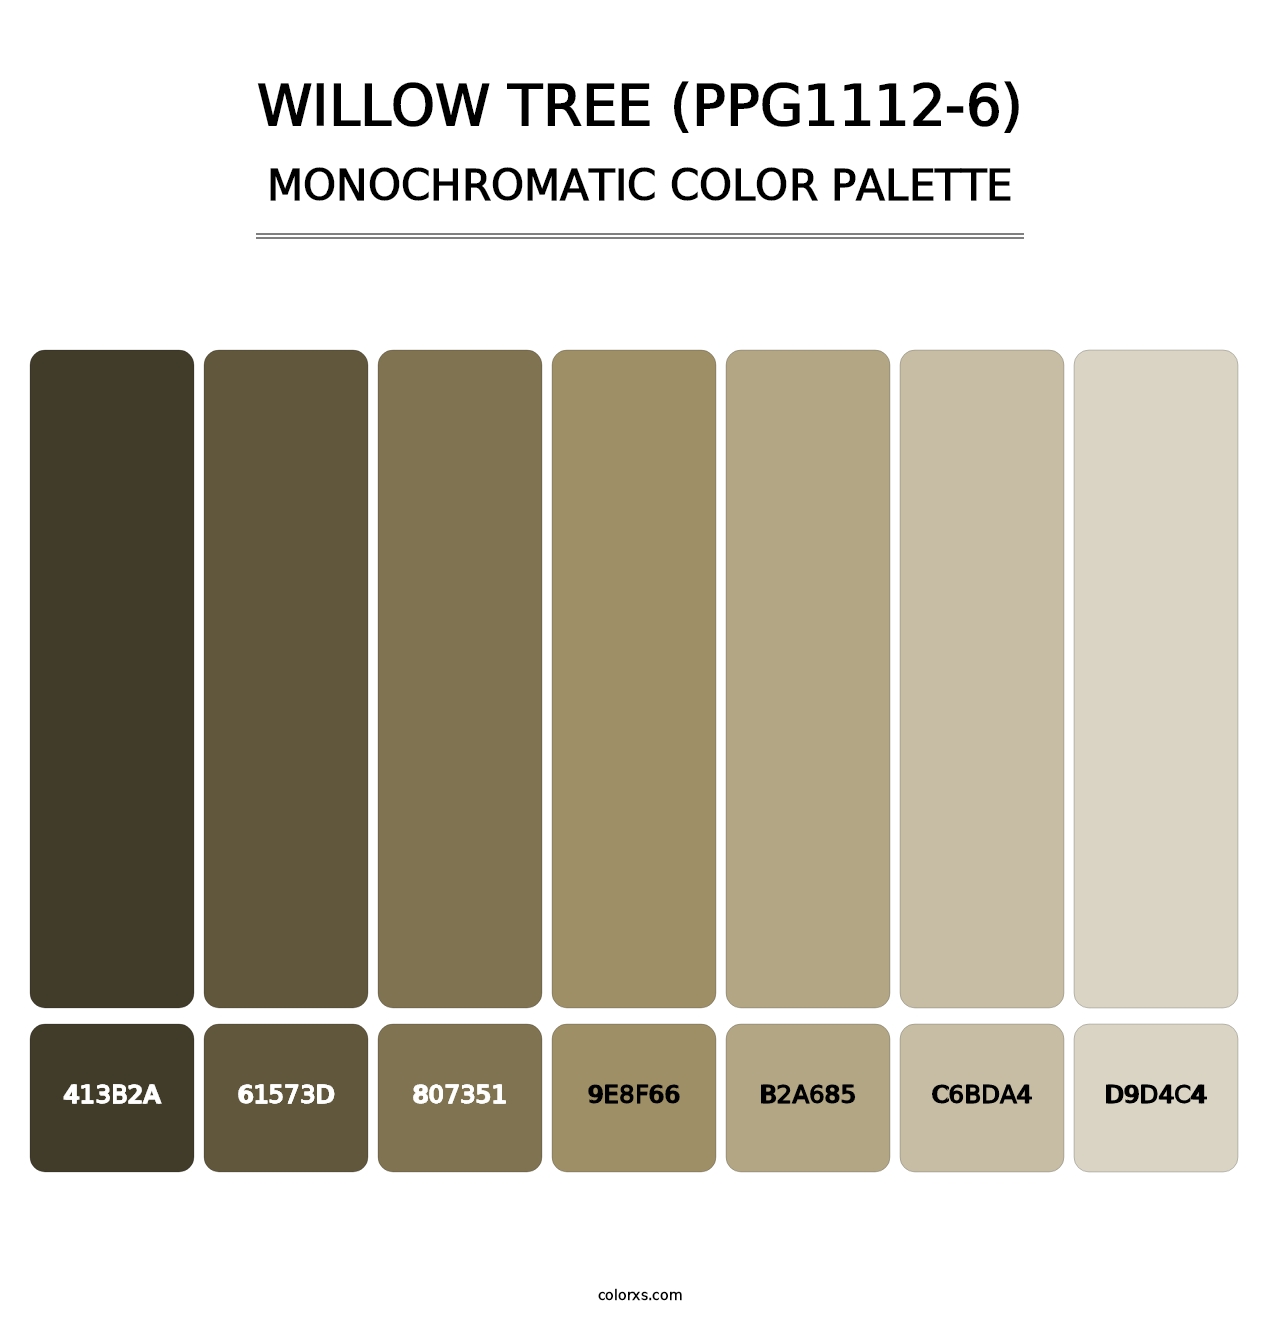 Willow Tree (PPG1112-6) - Monochromatic Color Palette